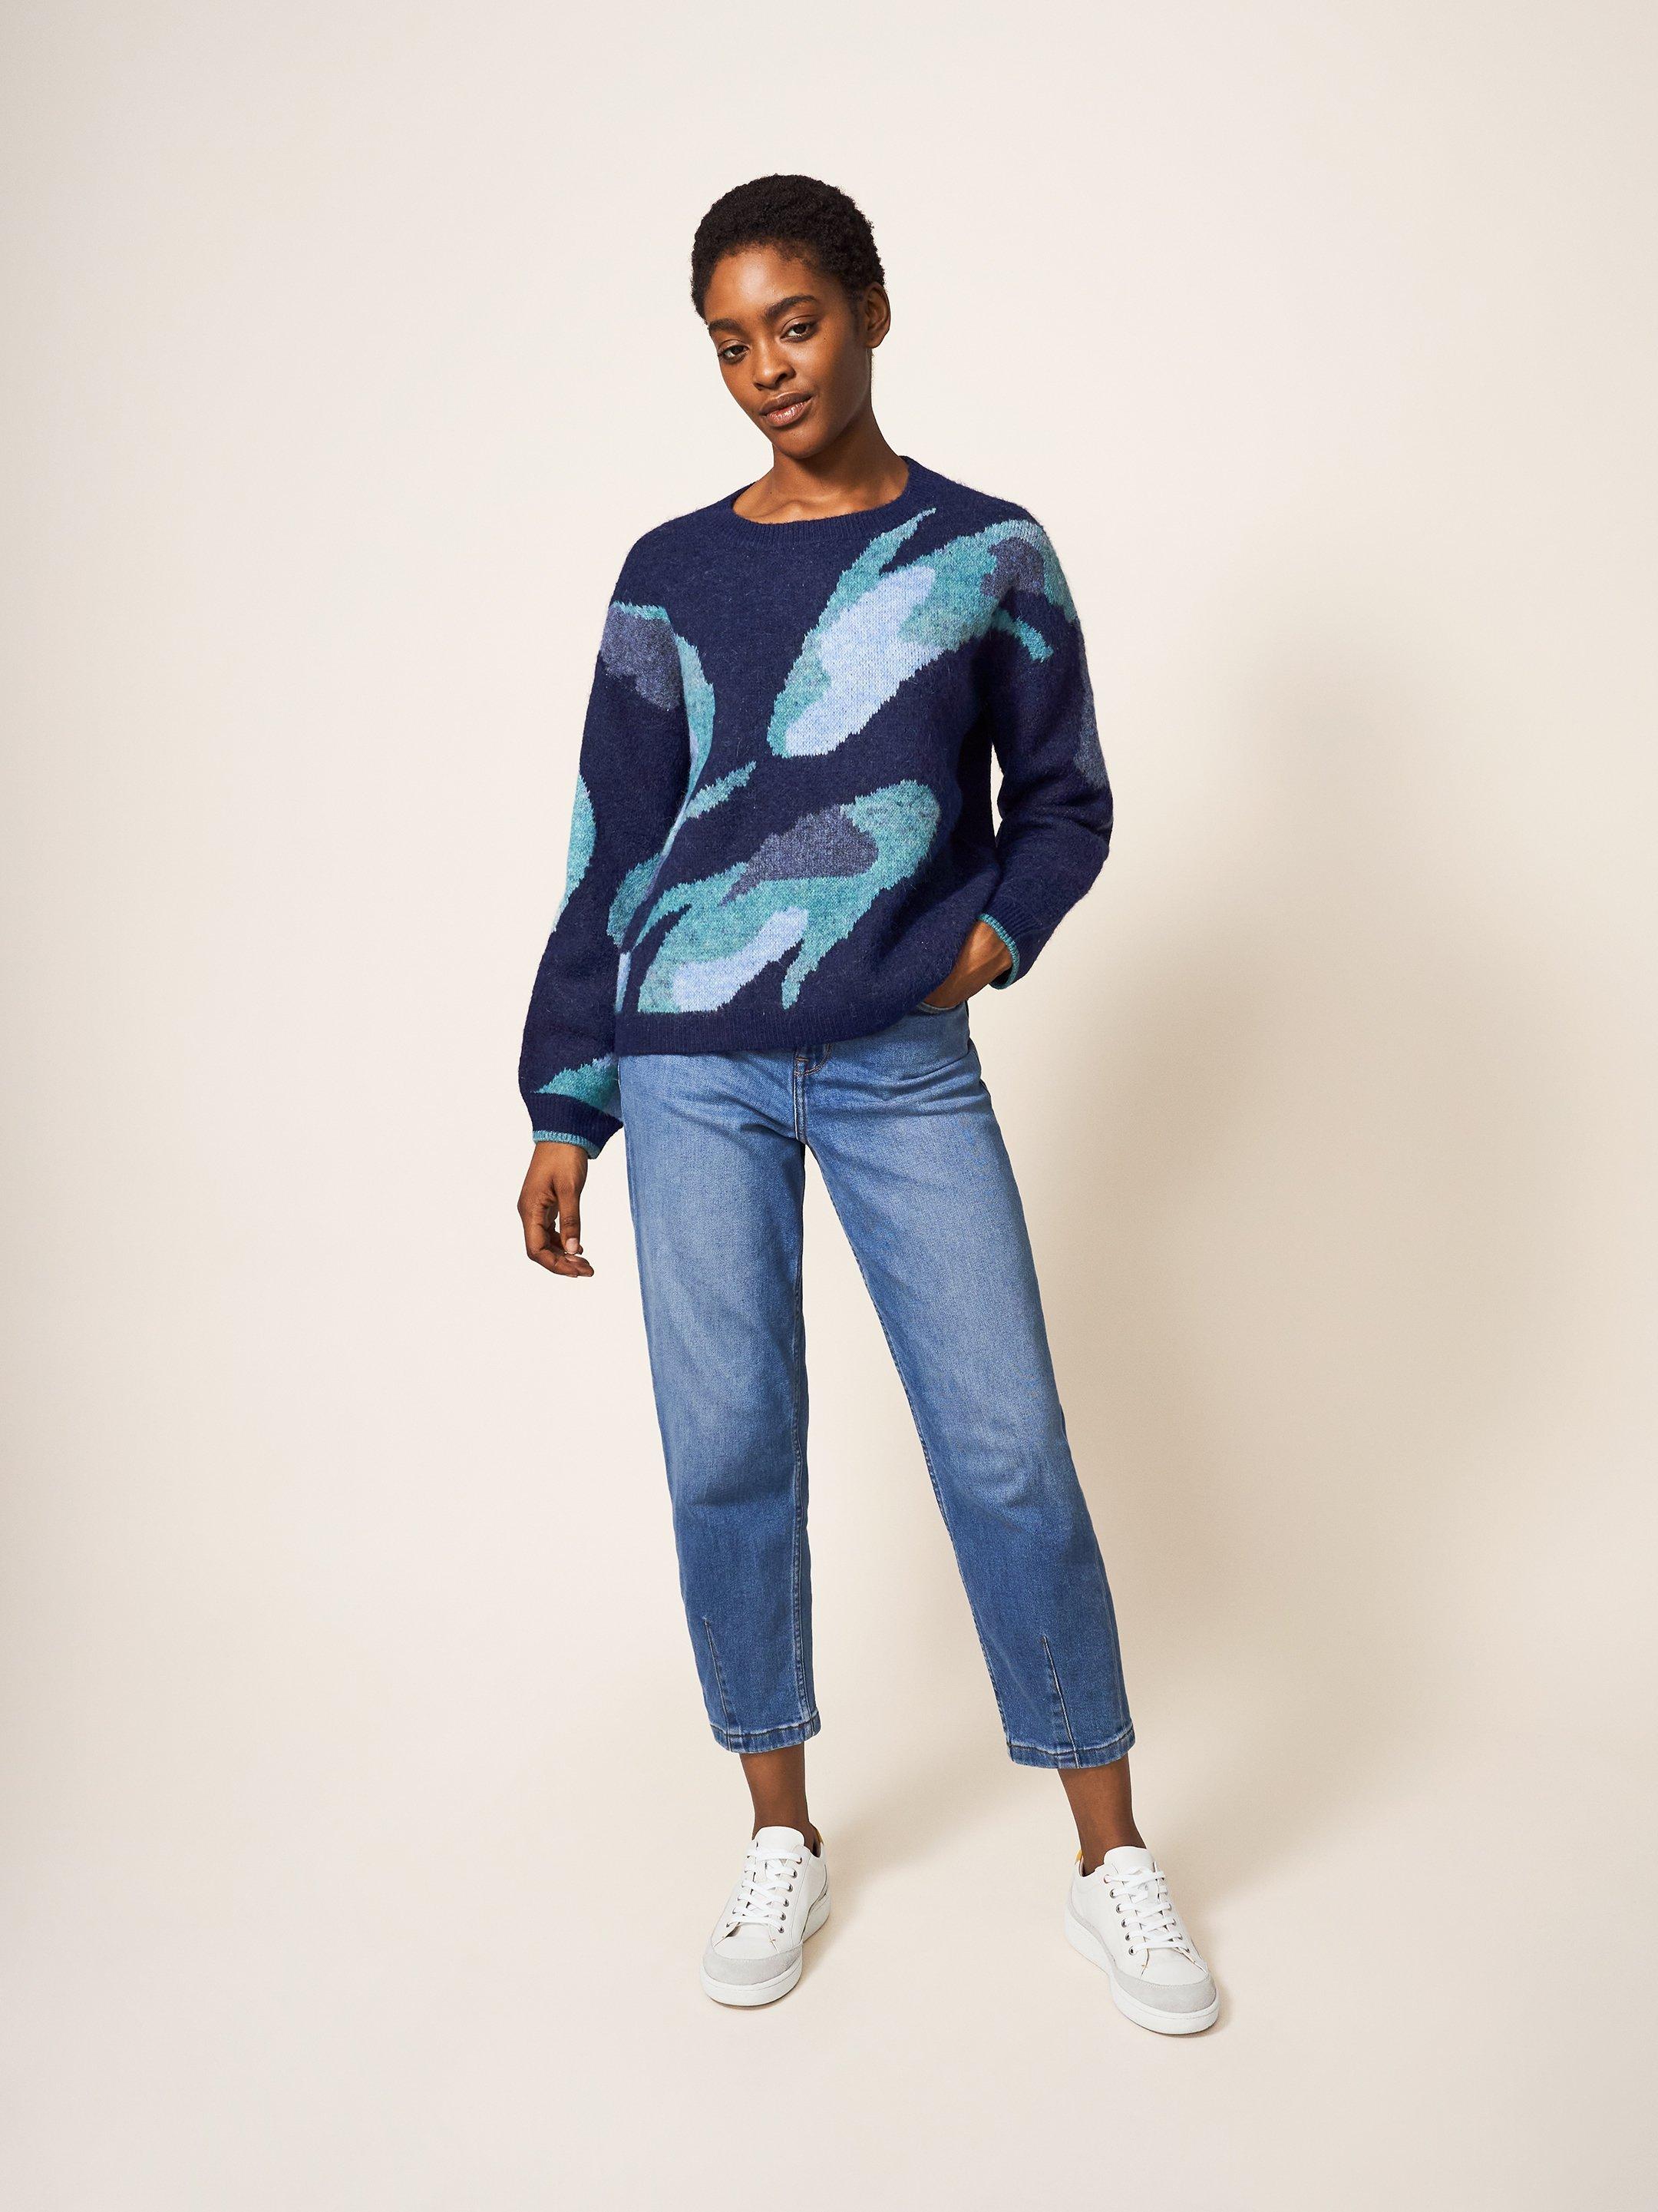 ABSTRACT KOI JUMPER in NAVY MULTI - MODEL FRONT